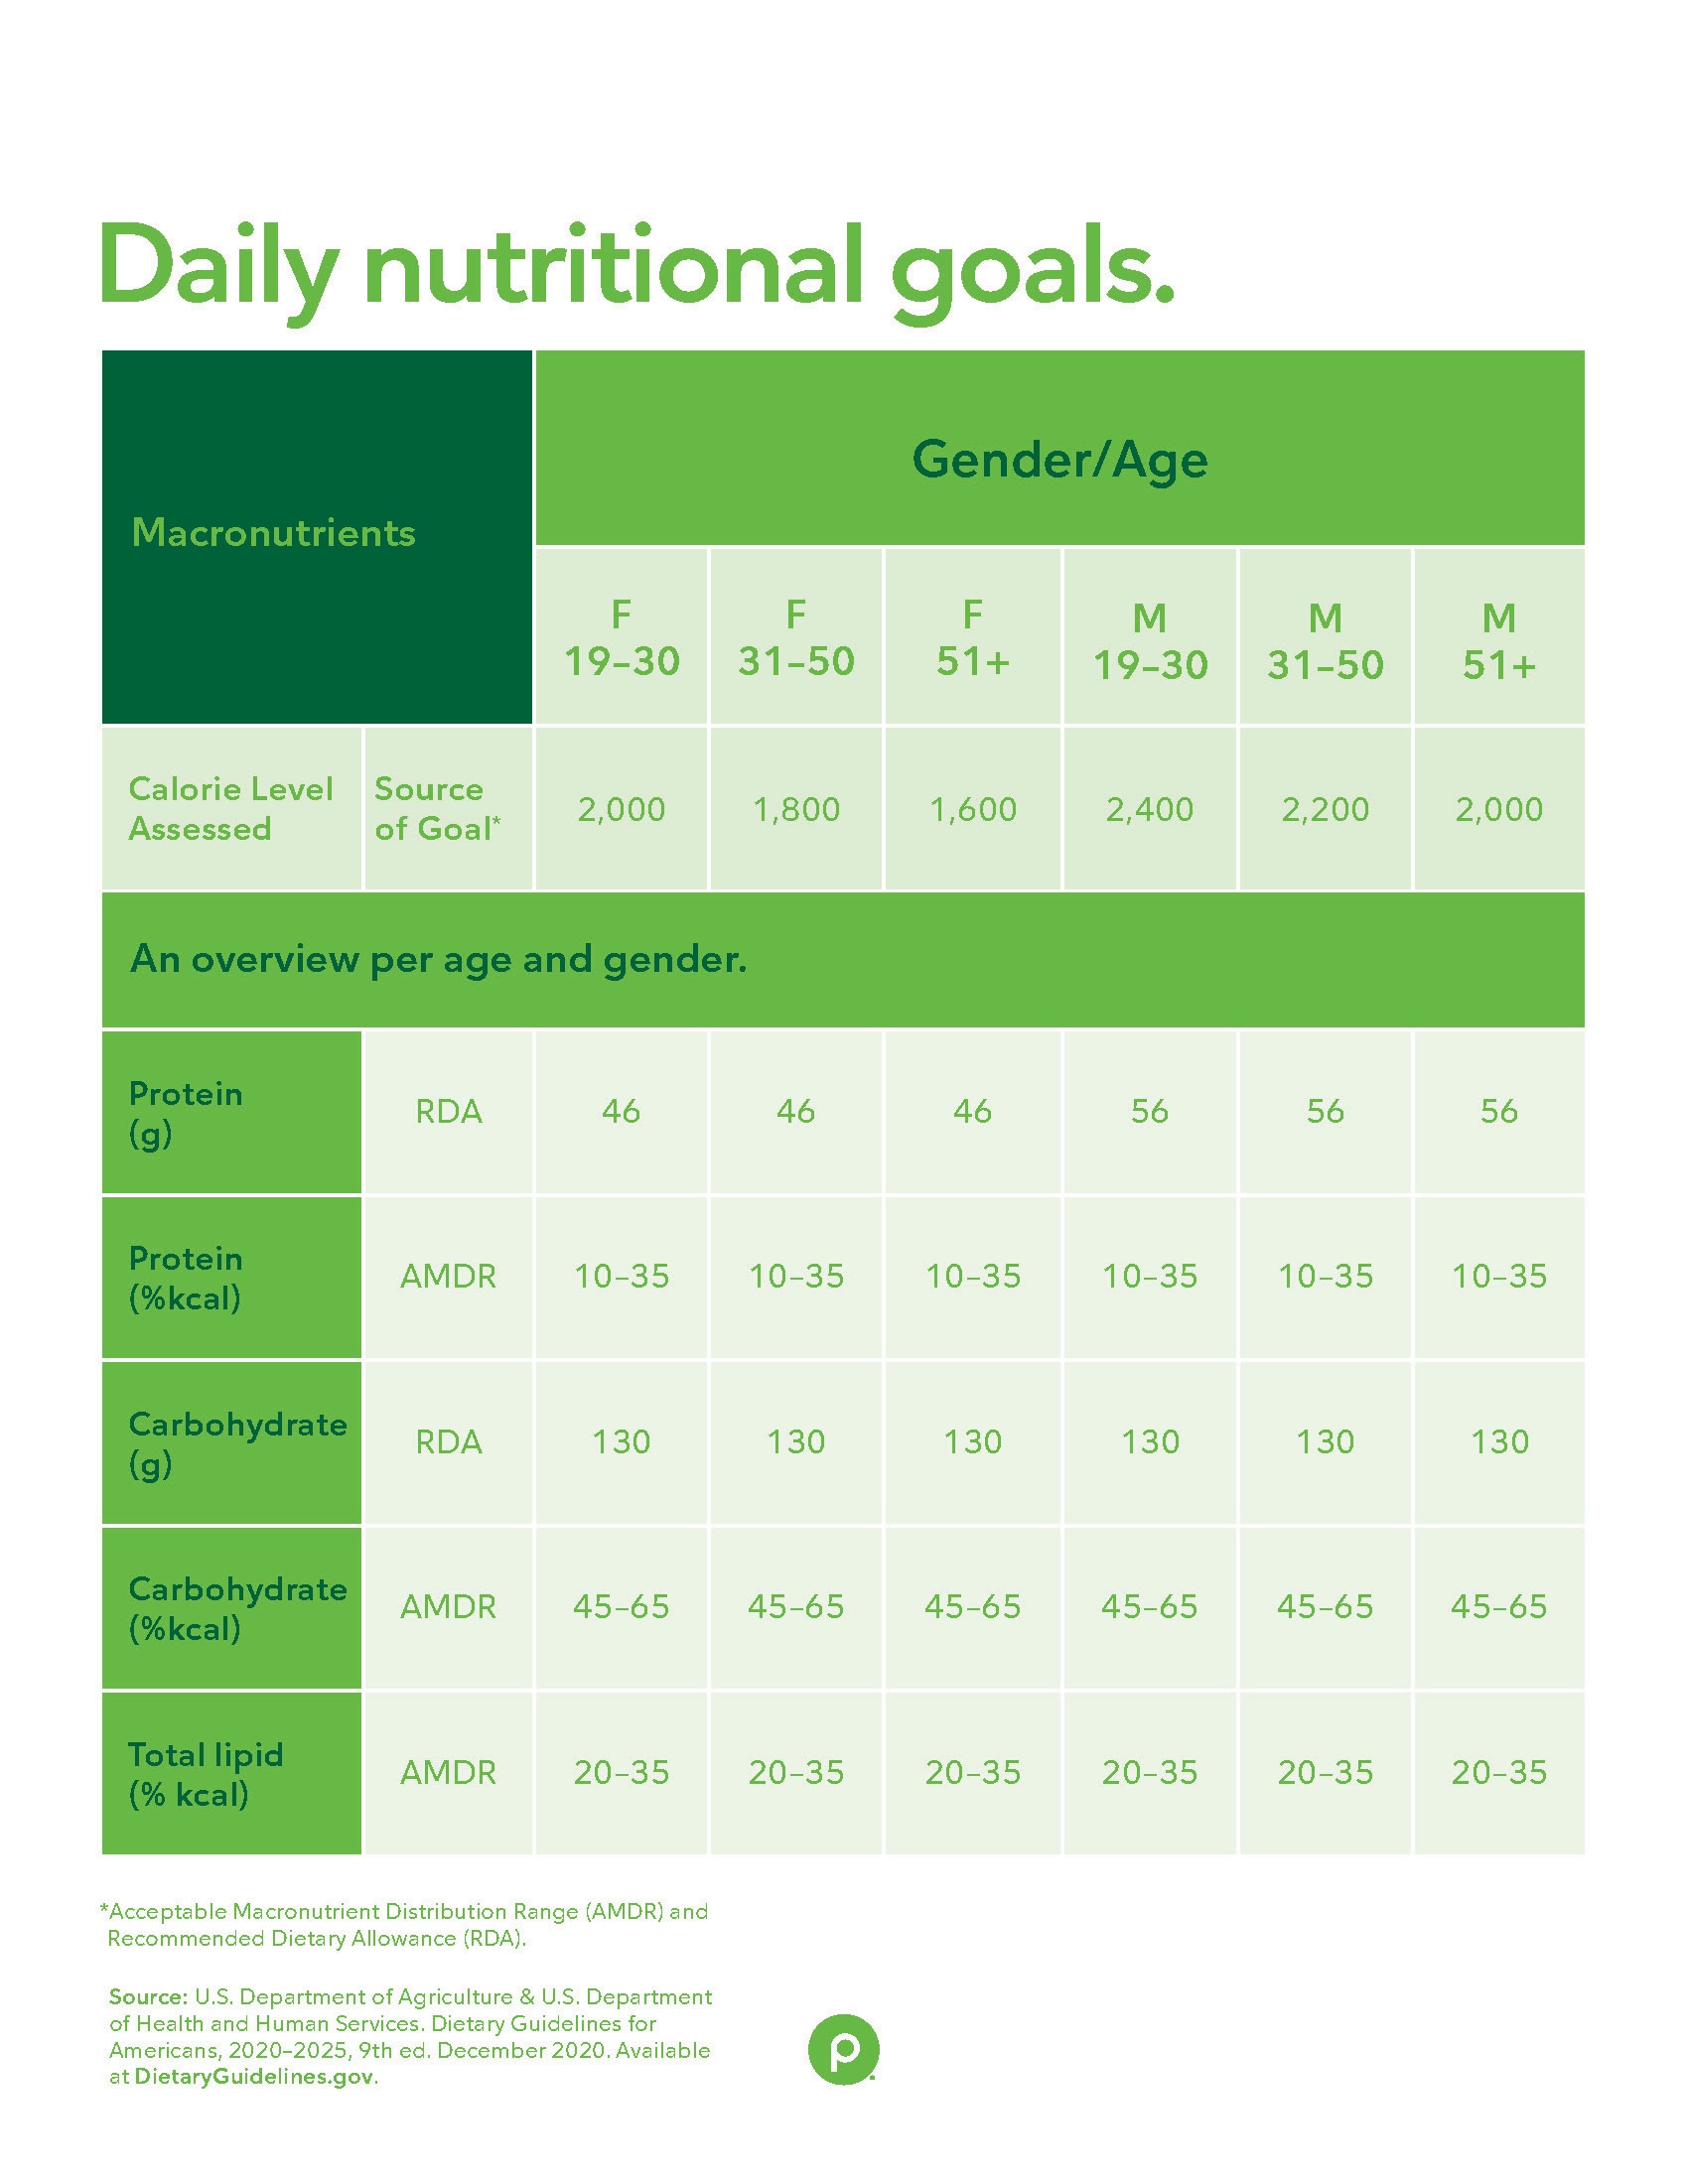 Daily Nutritional Goals